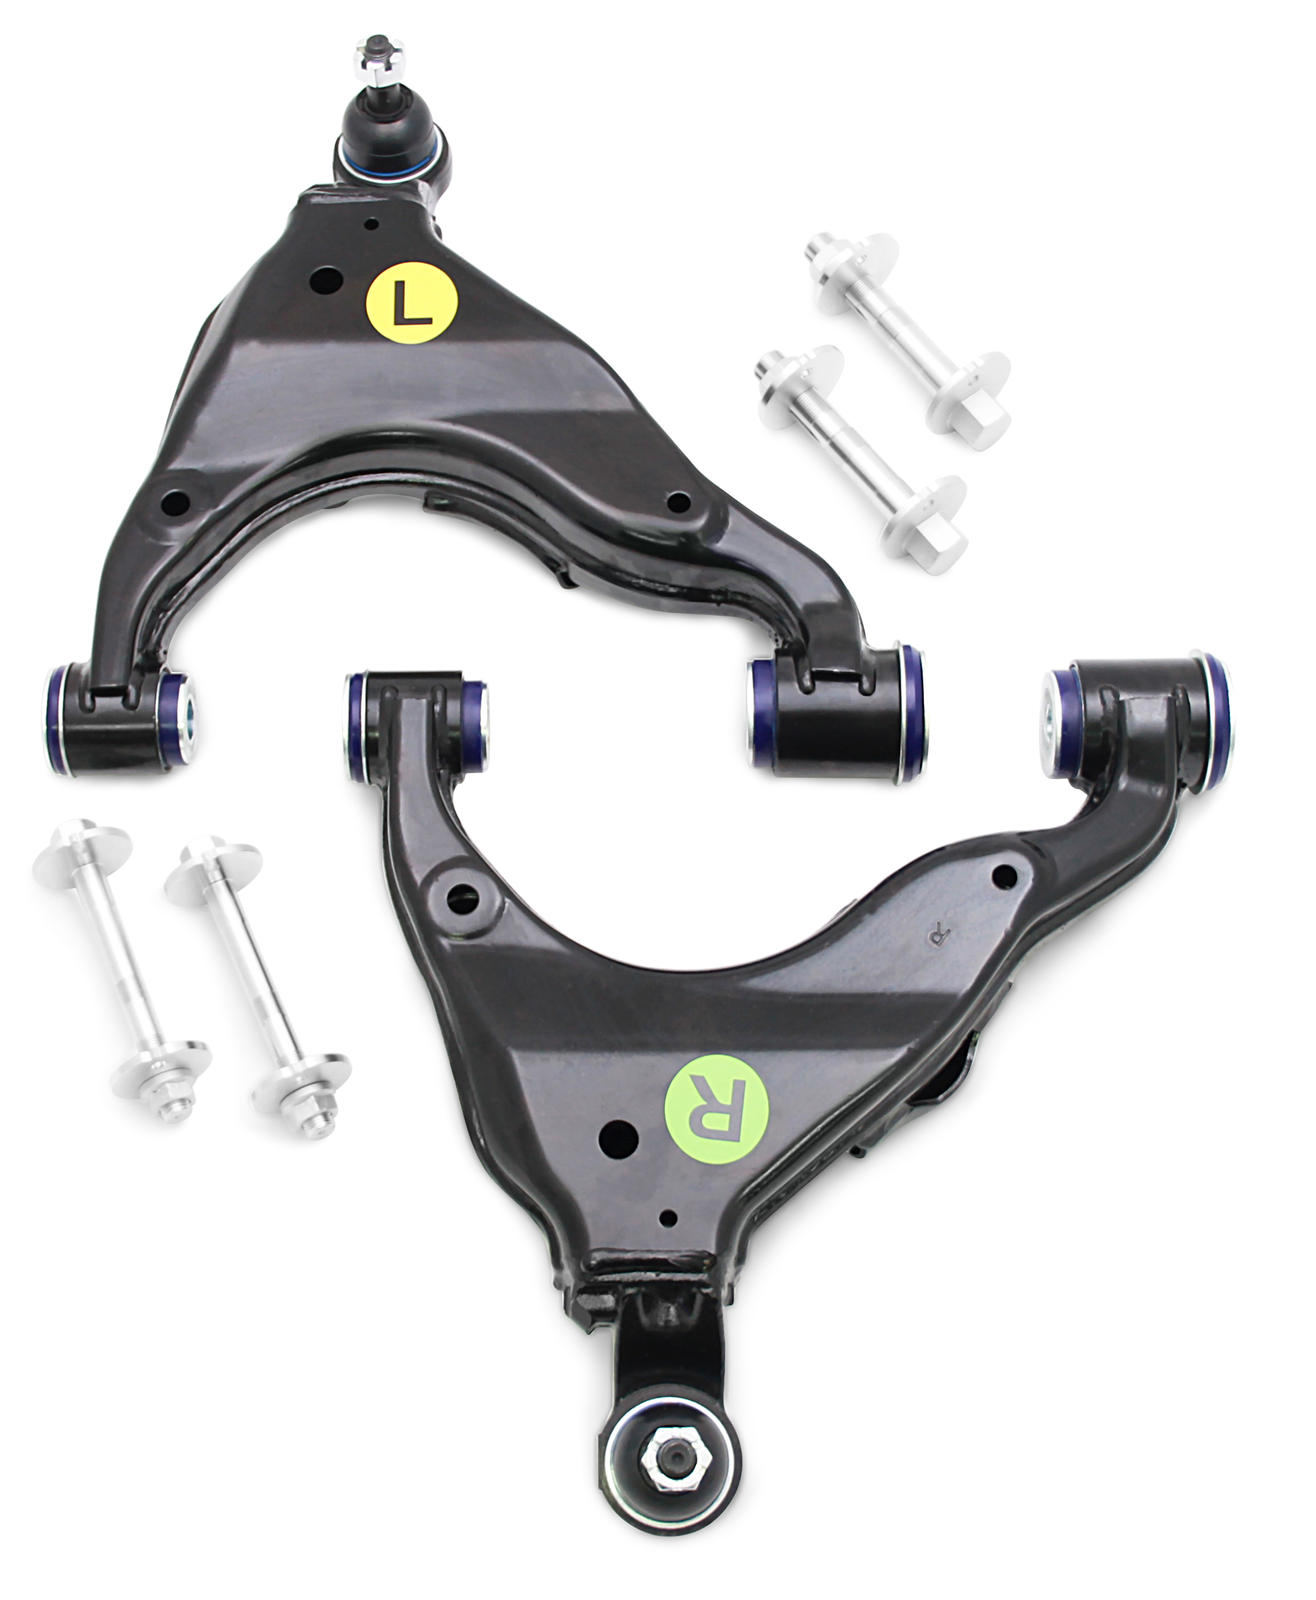 Front Lower Standard Control Arm Kit including Ball Joints to suit Toyota Prado, FJ Cruiser & Lexus GX (non KDSS vehicles)